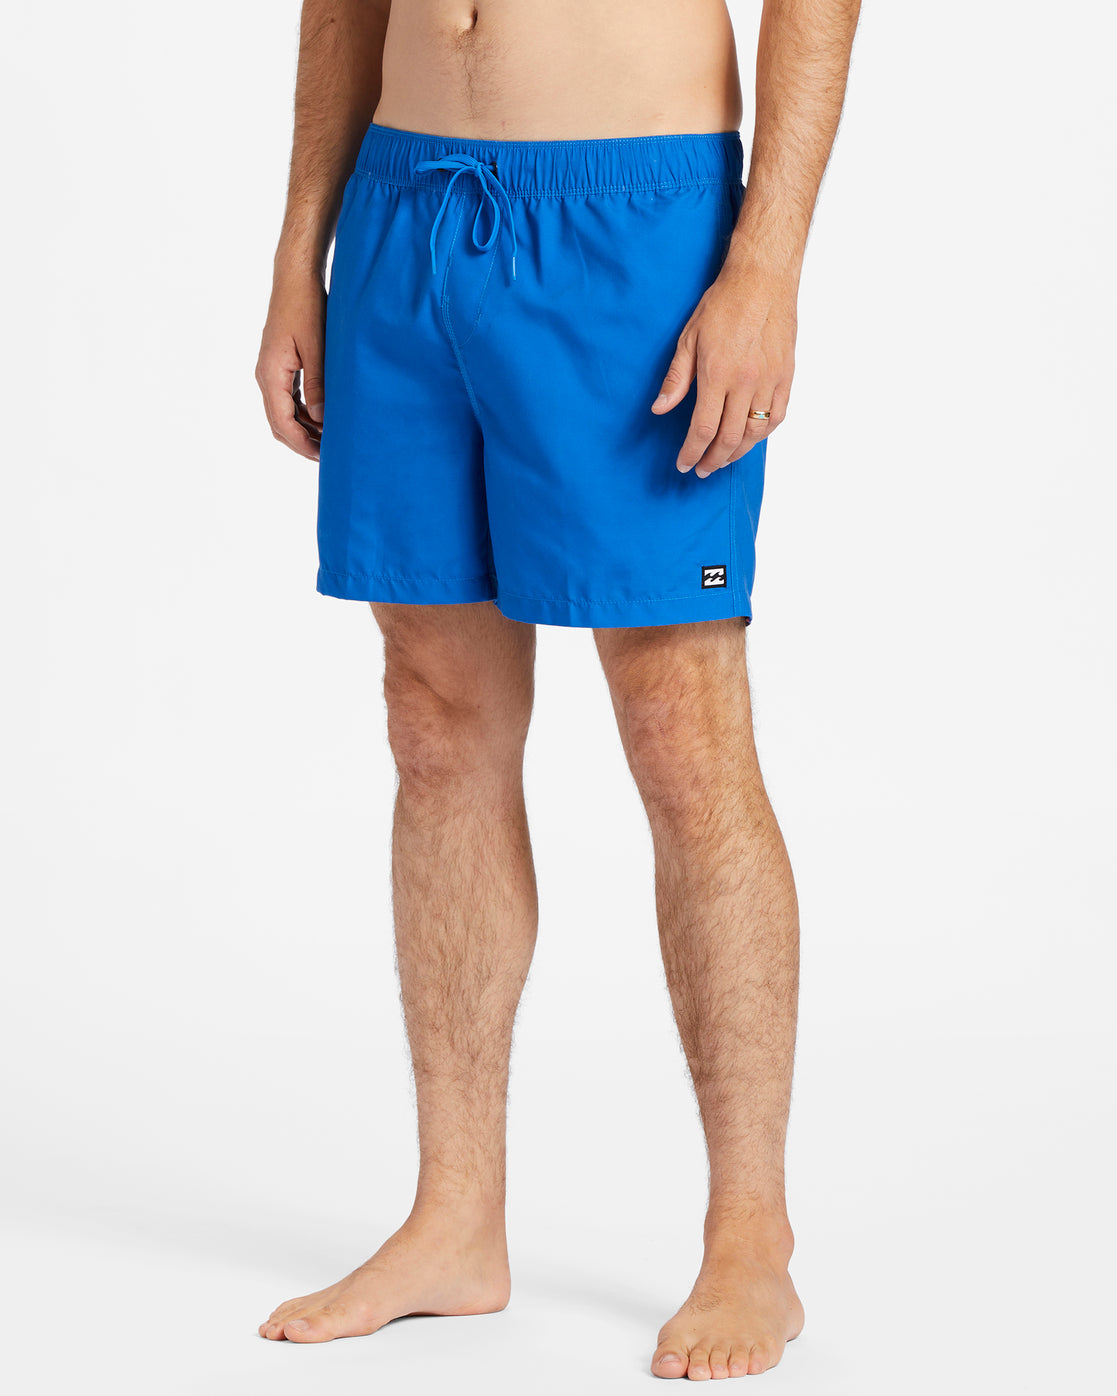 All Day Layback Boarshorts - COBALT